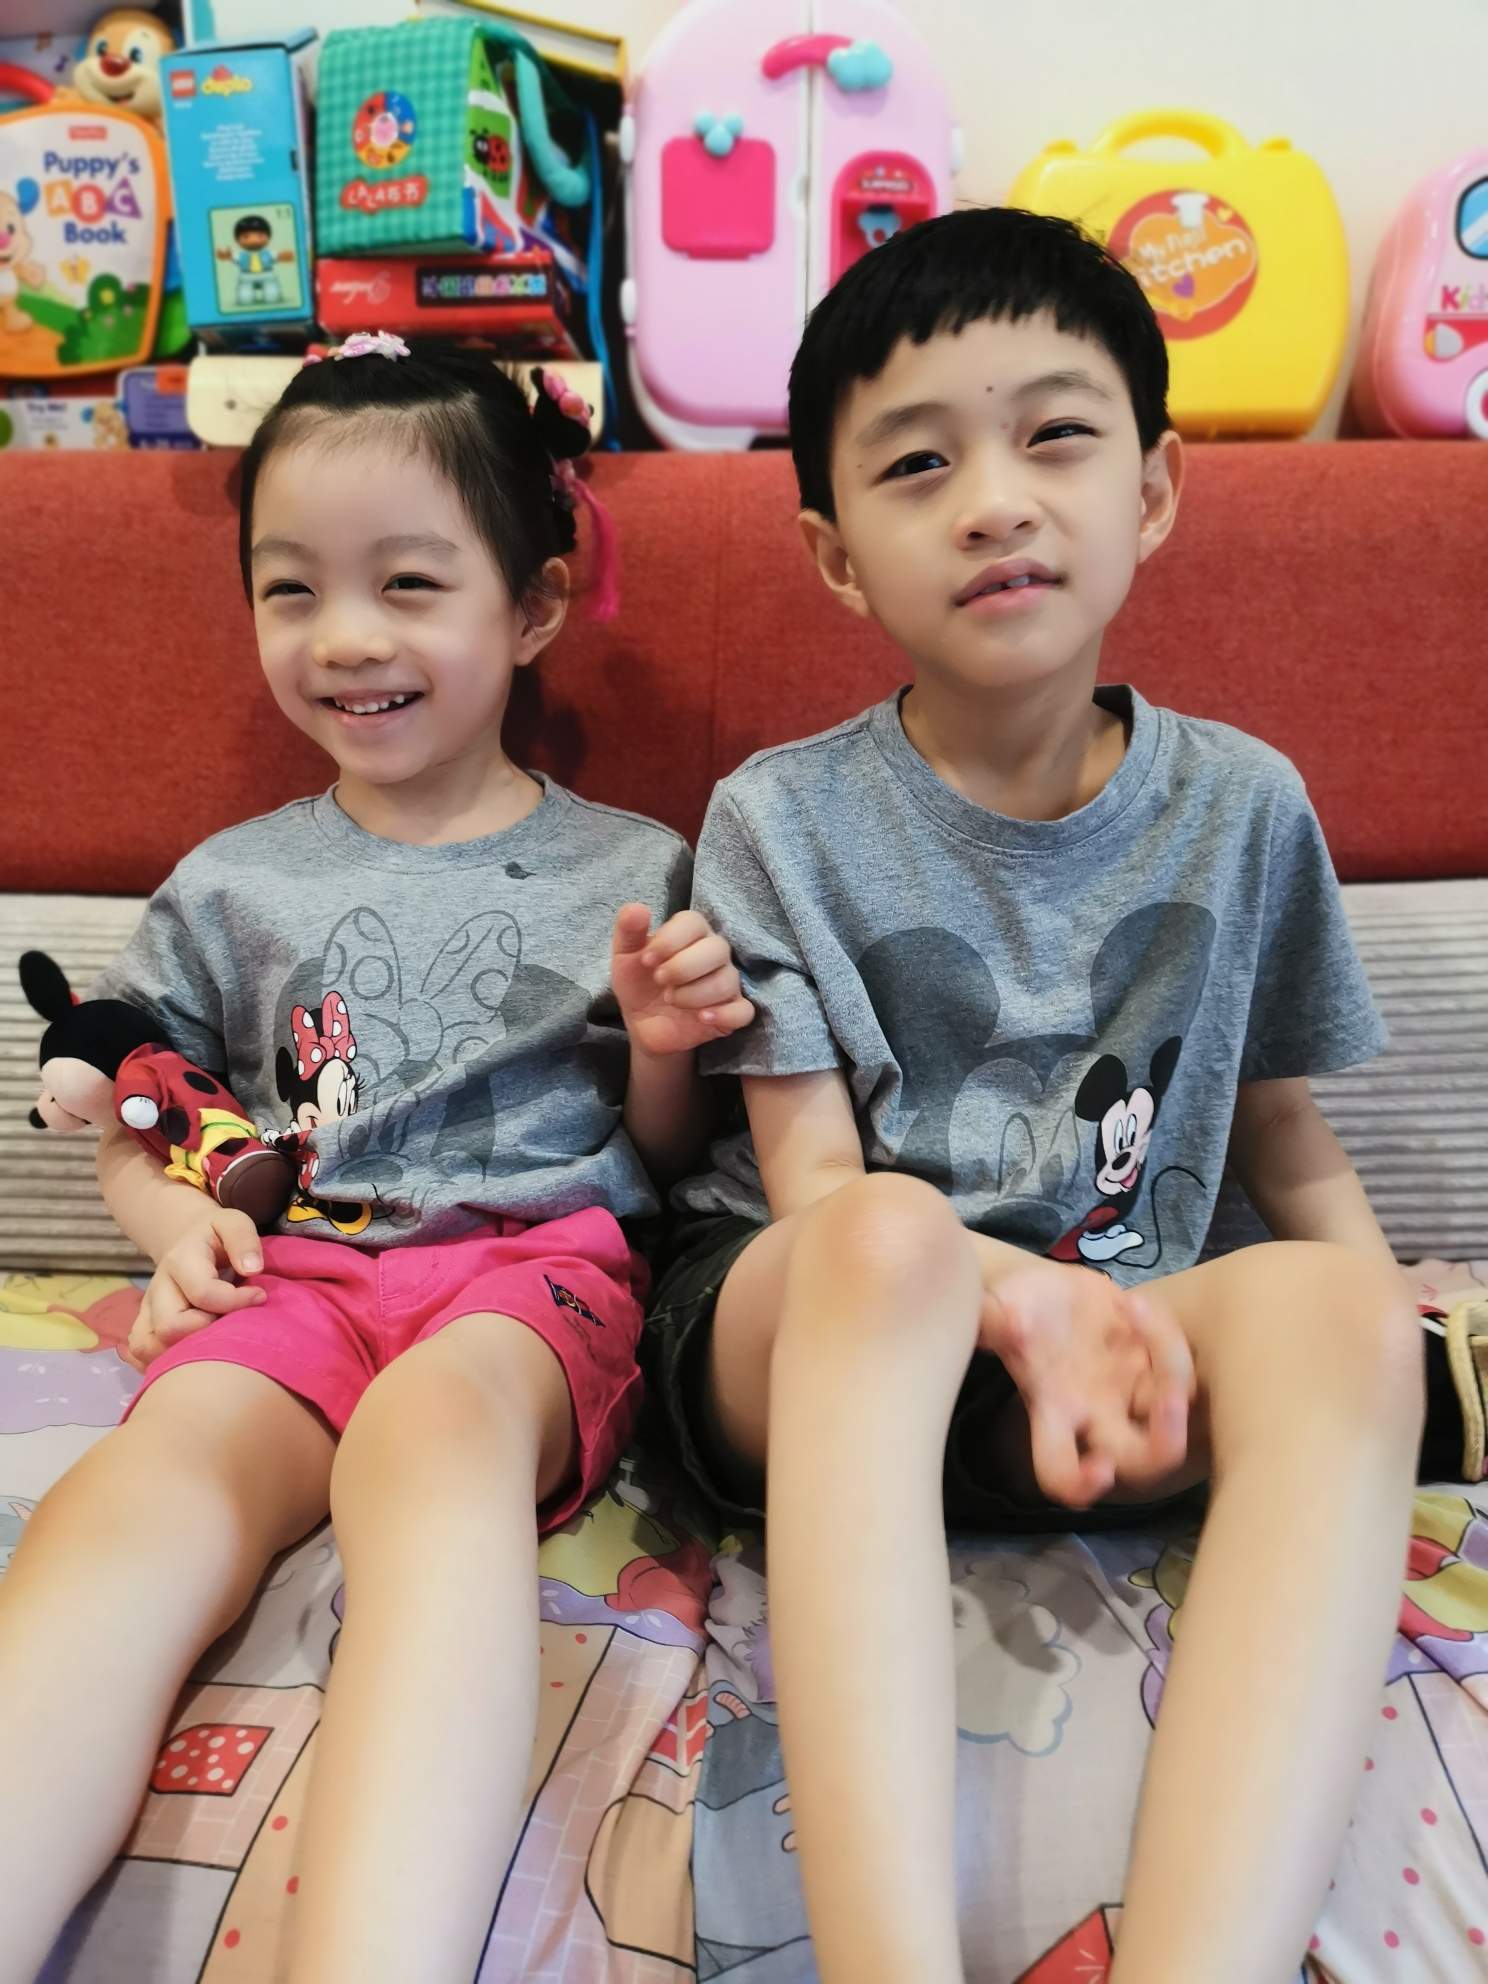 Giving up isnt an option - read how ngs children overcame a rare genetic disorder